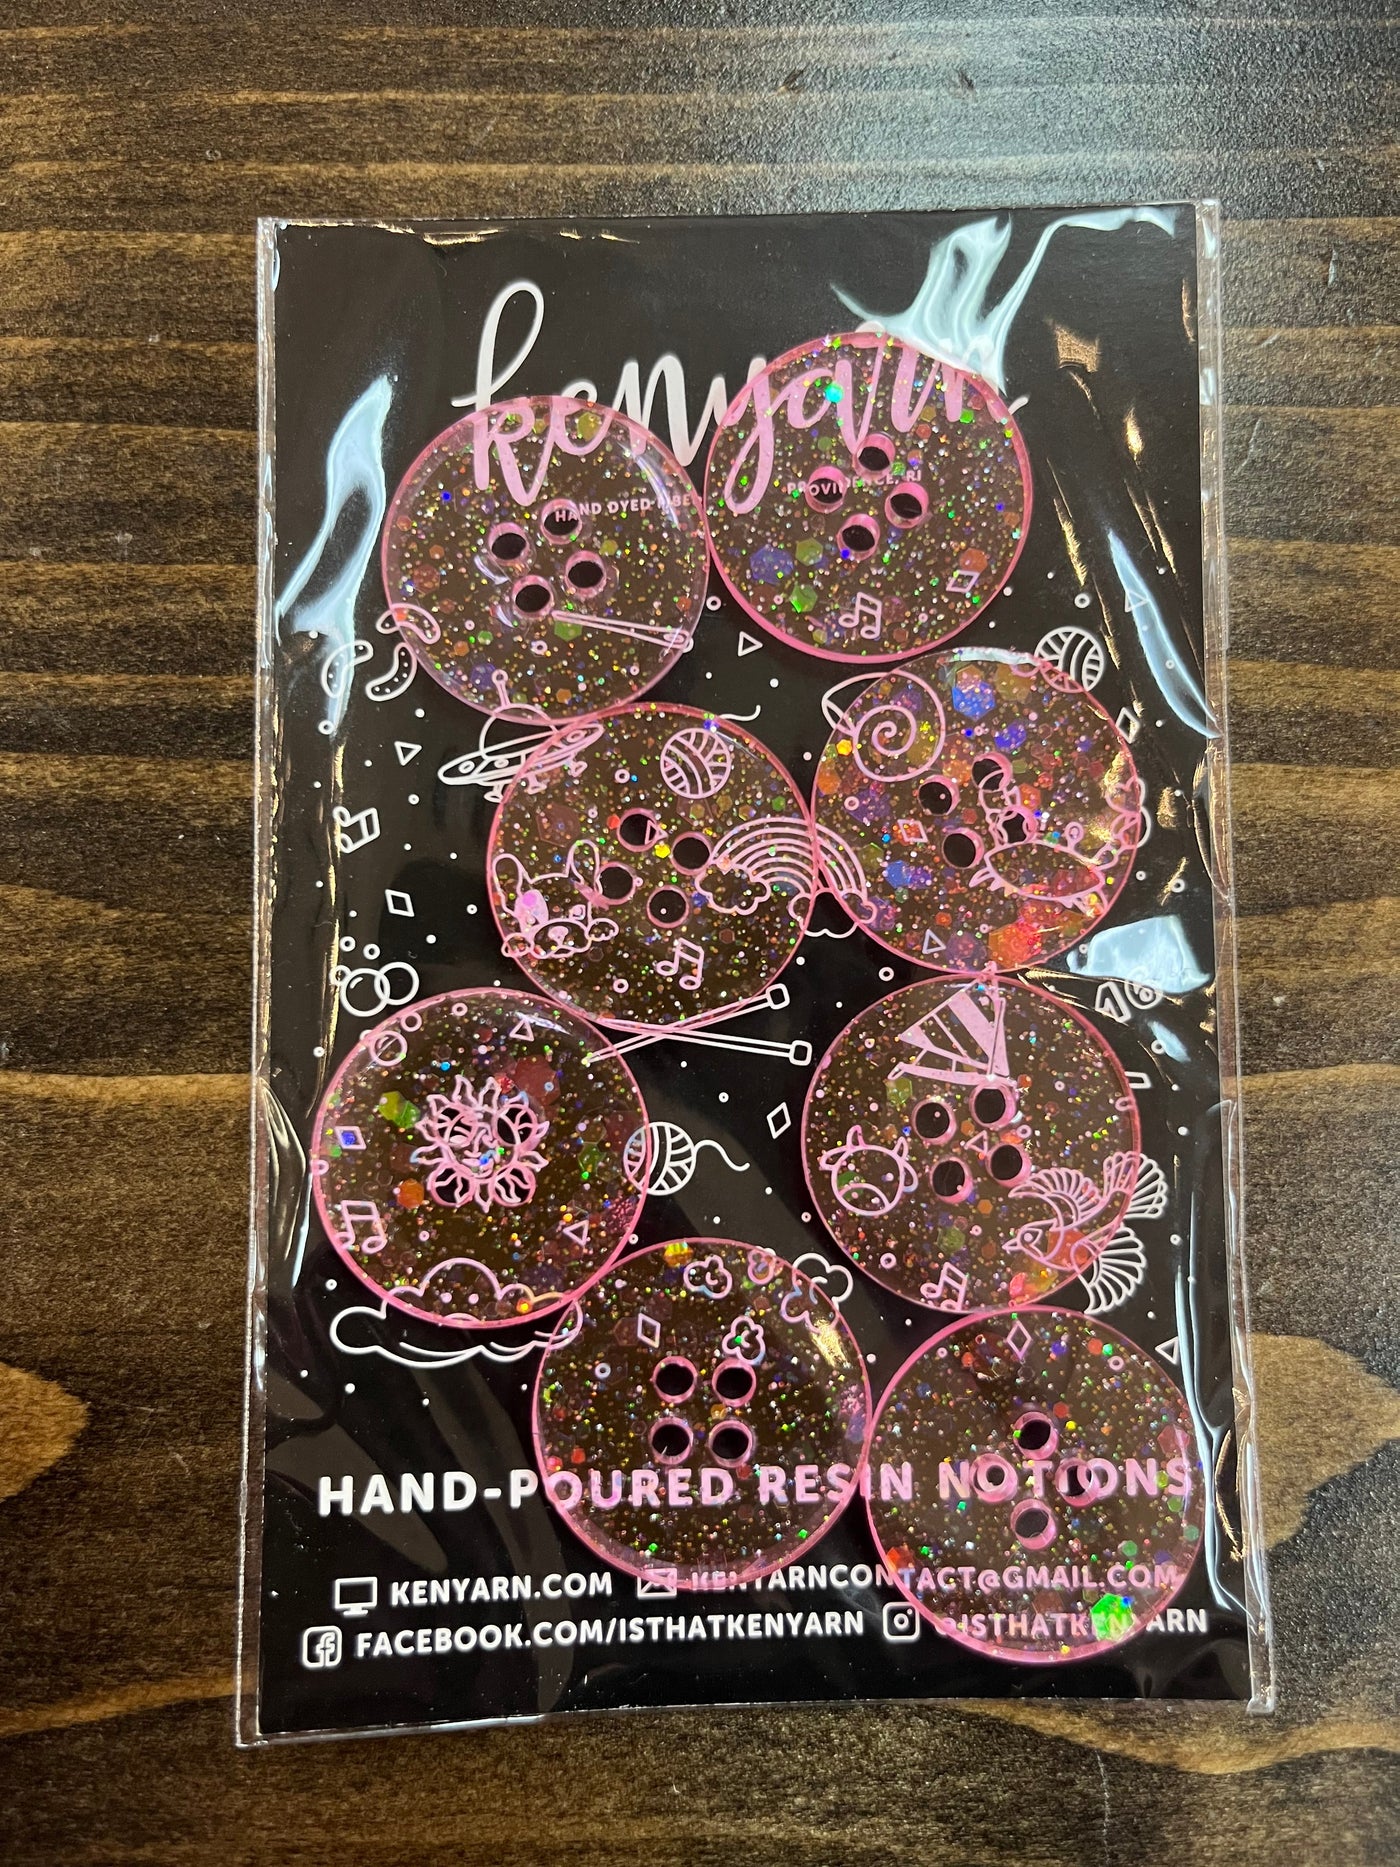  A bright pink 1-inch circle resin button with multi-colored transparent glitter swirling inside. The packaging reads "Kenyarn Hand Poured Resin Button."